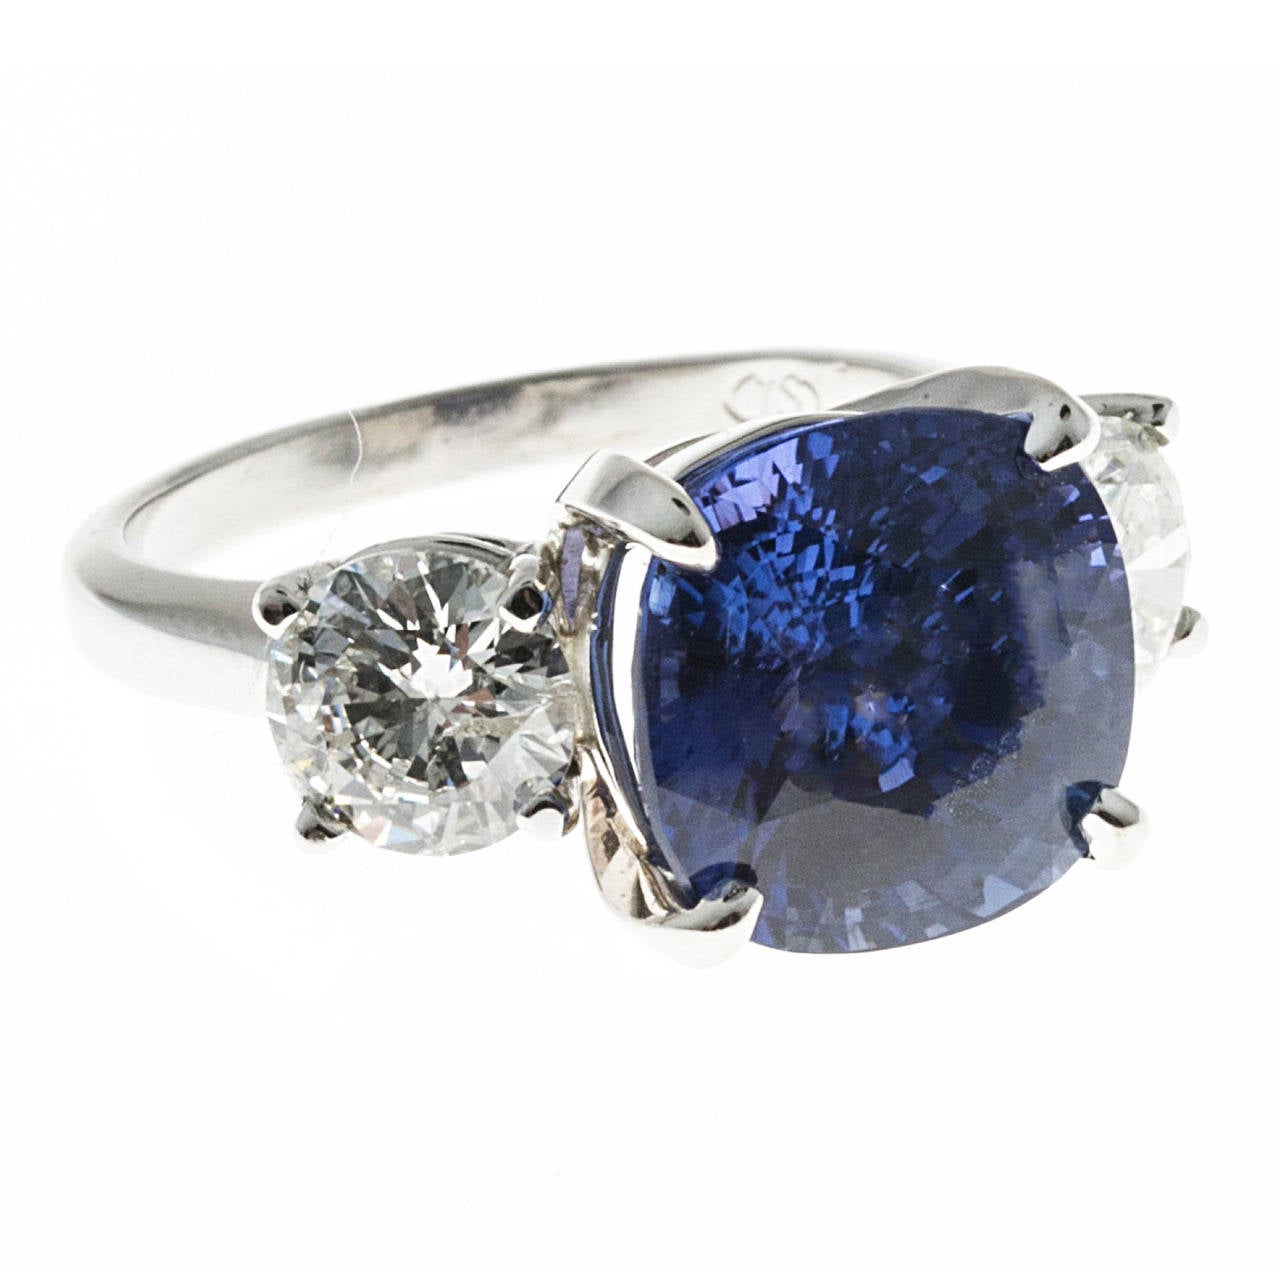 Peter Suchy no heat certified blue cushion cut Sapphire. 7.72ct with a white round brilliant cut diamond on each side.  Solid Platinum handmade setting. 

1 Cushion cut Sapphire, approx. total weight 7.72cts, 10.91 x 10.68 x 7.66mm, no heat and no